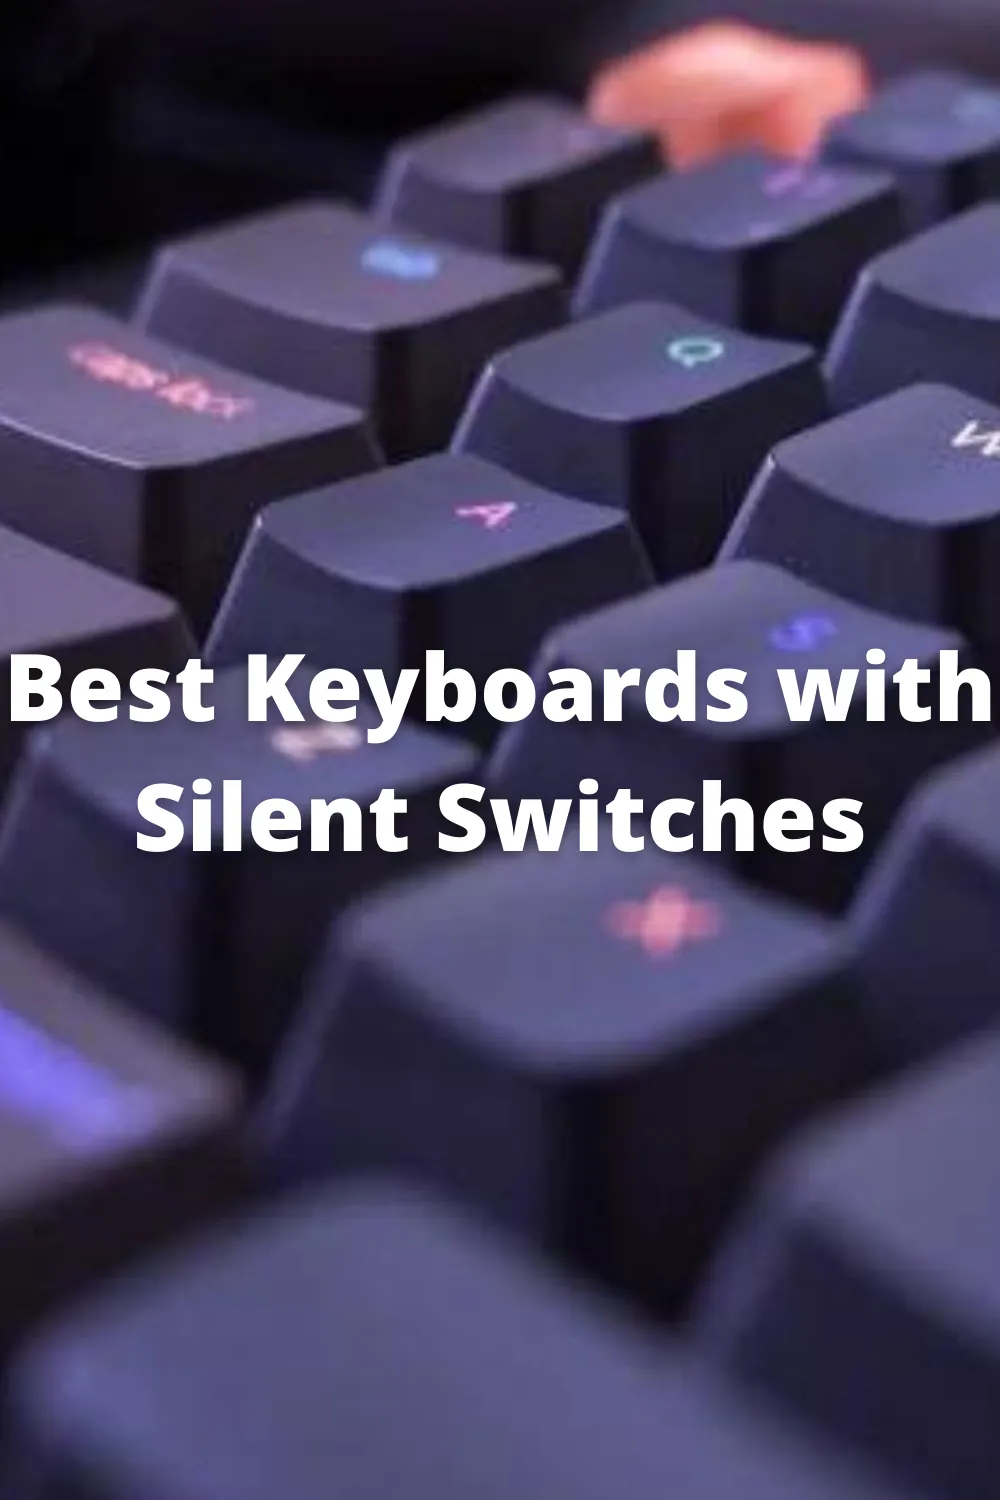 Best Keyboards with Silent Switches